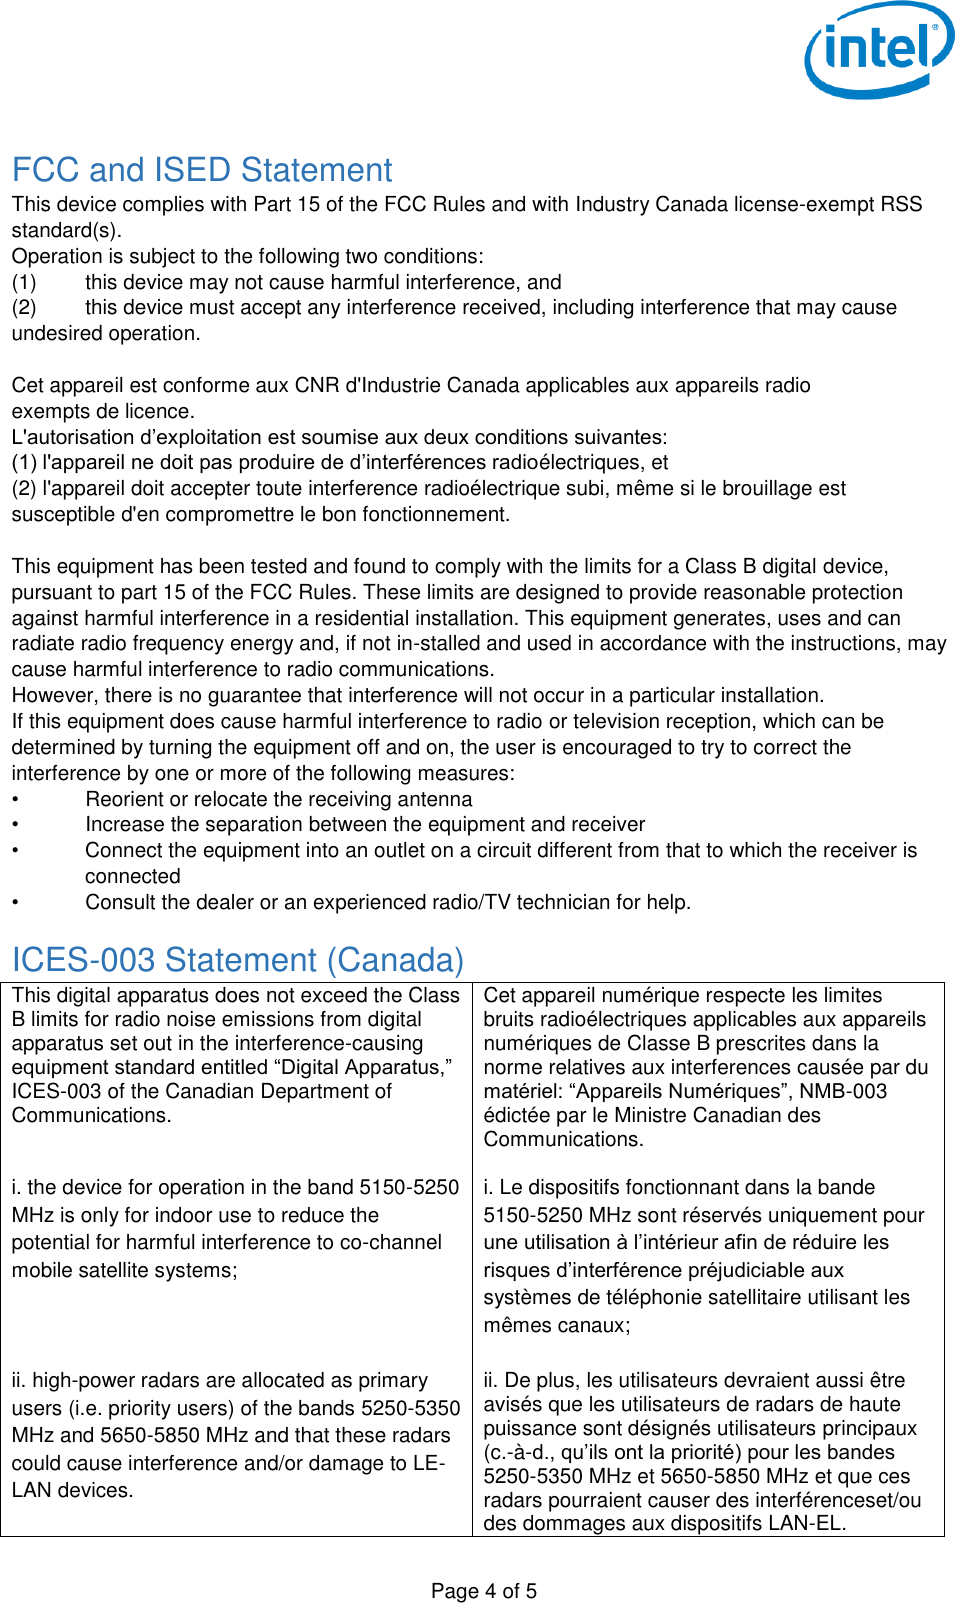  Page 4 of 5  FCC and ISED Statement This device complies with Part 15 of the FCC Rules and with Industry Canada license-exempt RSS standard(s). Operation is subject to the following two conditions: (1)  this device may not cause harmful interference, and  (2)  this device must accept any interference received, including interference that may cause undesired operation.  Cet appareil est conforme aux CNR d&apos;Industrie Canada applicables aux appareils radio exempts de licence. L&apos;autorisation d’exploitation est soumise aux deux conditions suivantes: (1) l&apos;appareil ne doit pas produire de d’interférences radioélectriques, et  (2) l&apos;appareil doit accepter toute interference radioélectrique subi, même si le brouillage est susceptible d&apos;en compromettre le bon fonctionnement.  This equipment has been tested and found to comply with the limits for a Class B digital device, pursuant to part 15 of the FCC Rules. These limits are designed to provide reasonable protection against harmful interference in a residential installation. This equipment generates, uses and can radiate radio frequency energy and, if not in-stalled and used in accordance with the instructions, may cause harmful interference to radio communications. However, there is no guarantee that interference will not occur in a particular installation. If this equipment does cause harmful interference to radio or television reception, which can be determined by turning the equipment off and on, the user is encouraged to try to correct the interference by one or more of the following measures: •  Reorient or relocate the receiving antenna •  Increase the separation between the equipment and receiver •  Connect the equipment into an outlet on a circuit different from that to which the receiver is connected •  Consult the dealer or an experienced radio/TV technician for help. ICES-003 Statement (Canada) This digital apparatus does not exceed the Class B limits for radio noise emissions from digital apparatus set out in the interference-causing equipment standard entitled “Digital Apparatus,” ICES-003 of the Canadian Department of Communications.   Cet appareil numérique respecte les limites bruits radioélectriques applicables aux appareils numériques de Classe B prescrites dans la norme relatives aux interferences causée par du matériel: “Appareils Numériques”, NMB-003 édictée par le Ministre Canadian des Communications.  i. the device for operation in the band 5150-5250 MHz is only for indoor use to reduce the potential for harmful interference to co-channel mobile satellite systems;  i. Le dispositifs fonctionnant dans la bande 5150-5250 MHz sont réservés uniquement pour une utilisation à l’intérieur afin de réduire les risques d’interférence préjudiciable aux systèmes de téléphonie satellitaire utilisant les mêmes canaux;  ii. high-power radars are allocated as primary users (i.e. priority users) of the bands 5250-5350 MHz and 5650-5850 MHz and that these radars could cause interference and/or damage to LE-LAN devices. ii. De plus, les utilisateurs devraient aussi être avisés que les utilisateurs de radars de haute puissance sont désignés utilisateurs principaux (c.-à-d., qu’ils ont la priorité) pour les bandes 5250-5350 MHz et 5650-5850 MHz et que ces radars pourraient causer des interférenceset/ou des dommages aux dispositifs LAN-EL. 